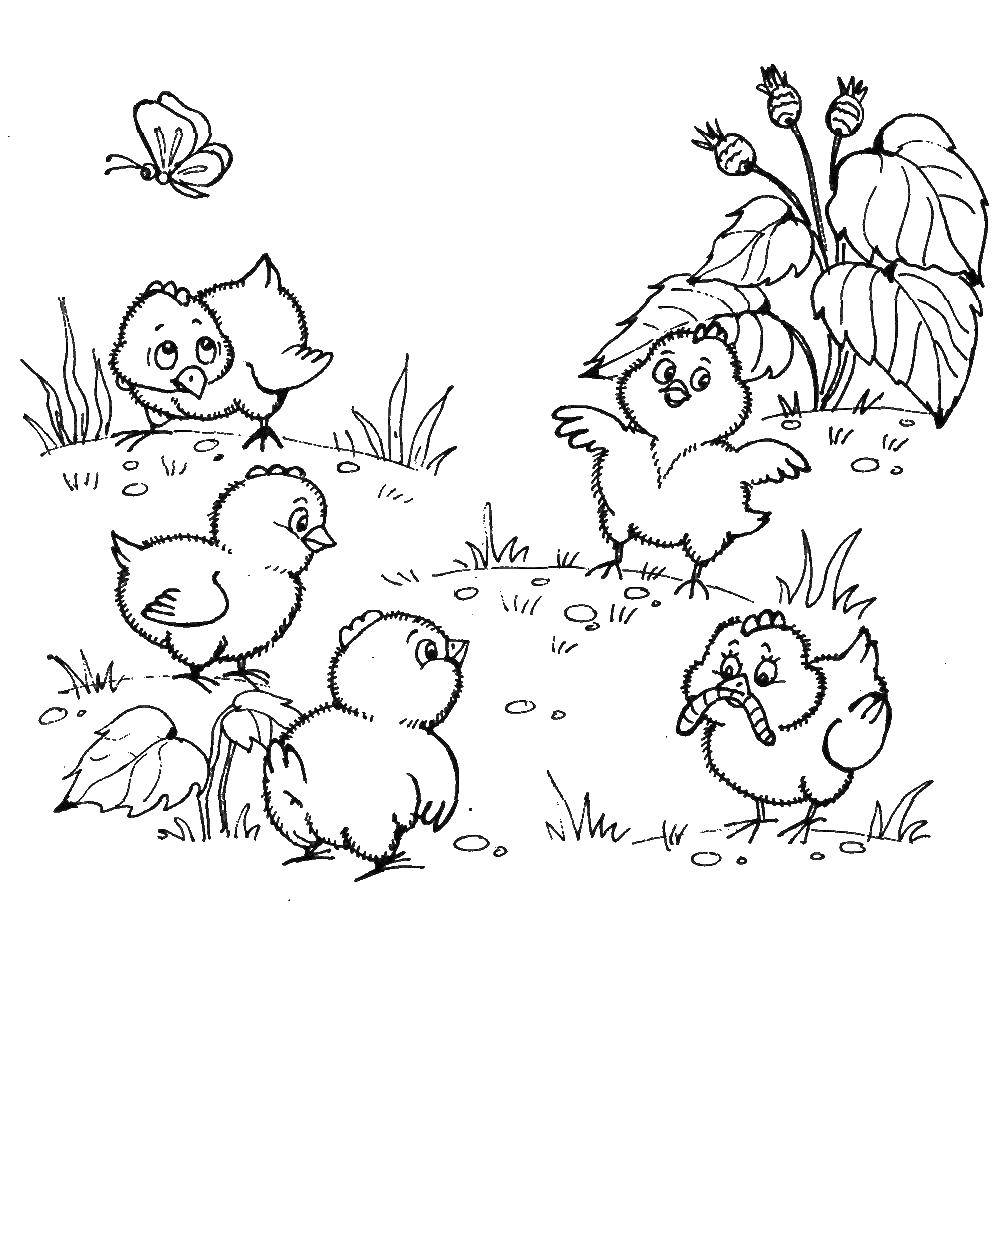 Coloring Chickens playing in the meadow. Category birds. Tags:  Birds, chickens.